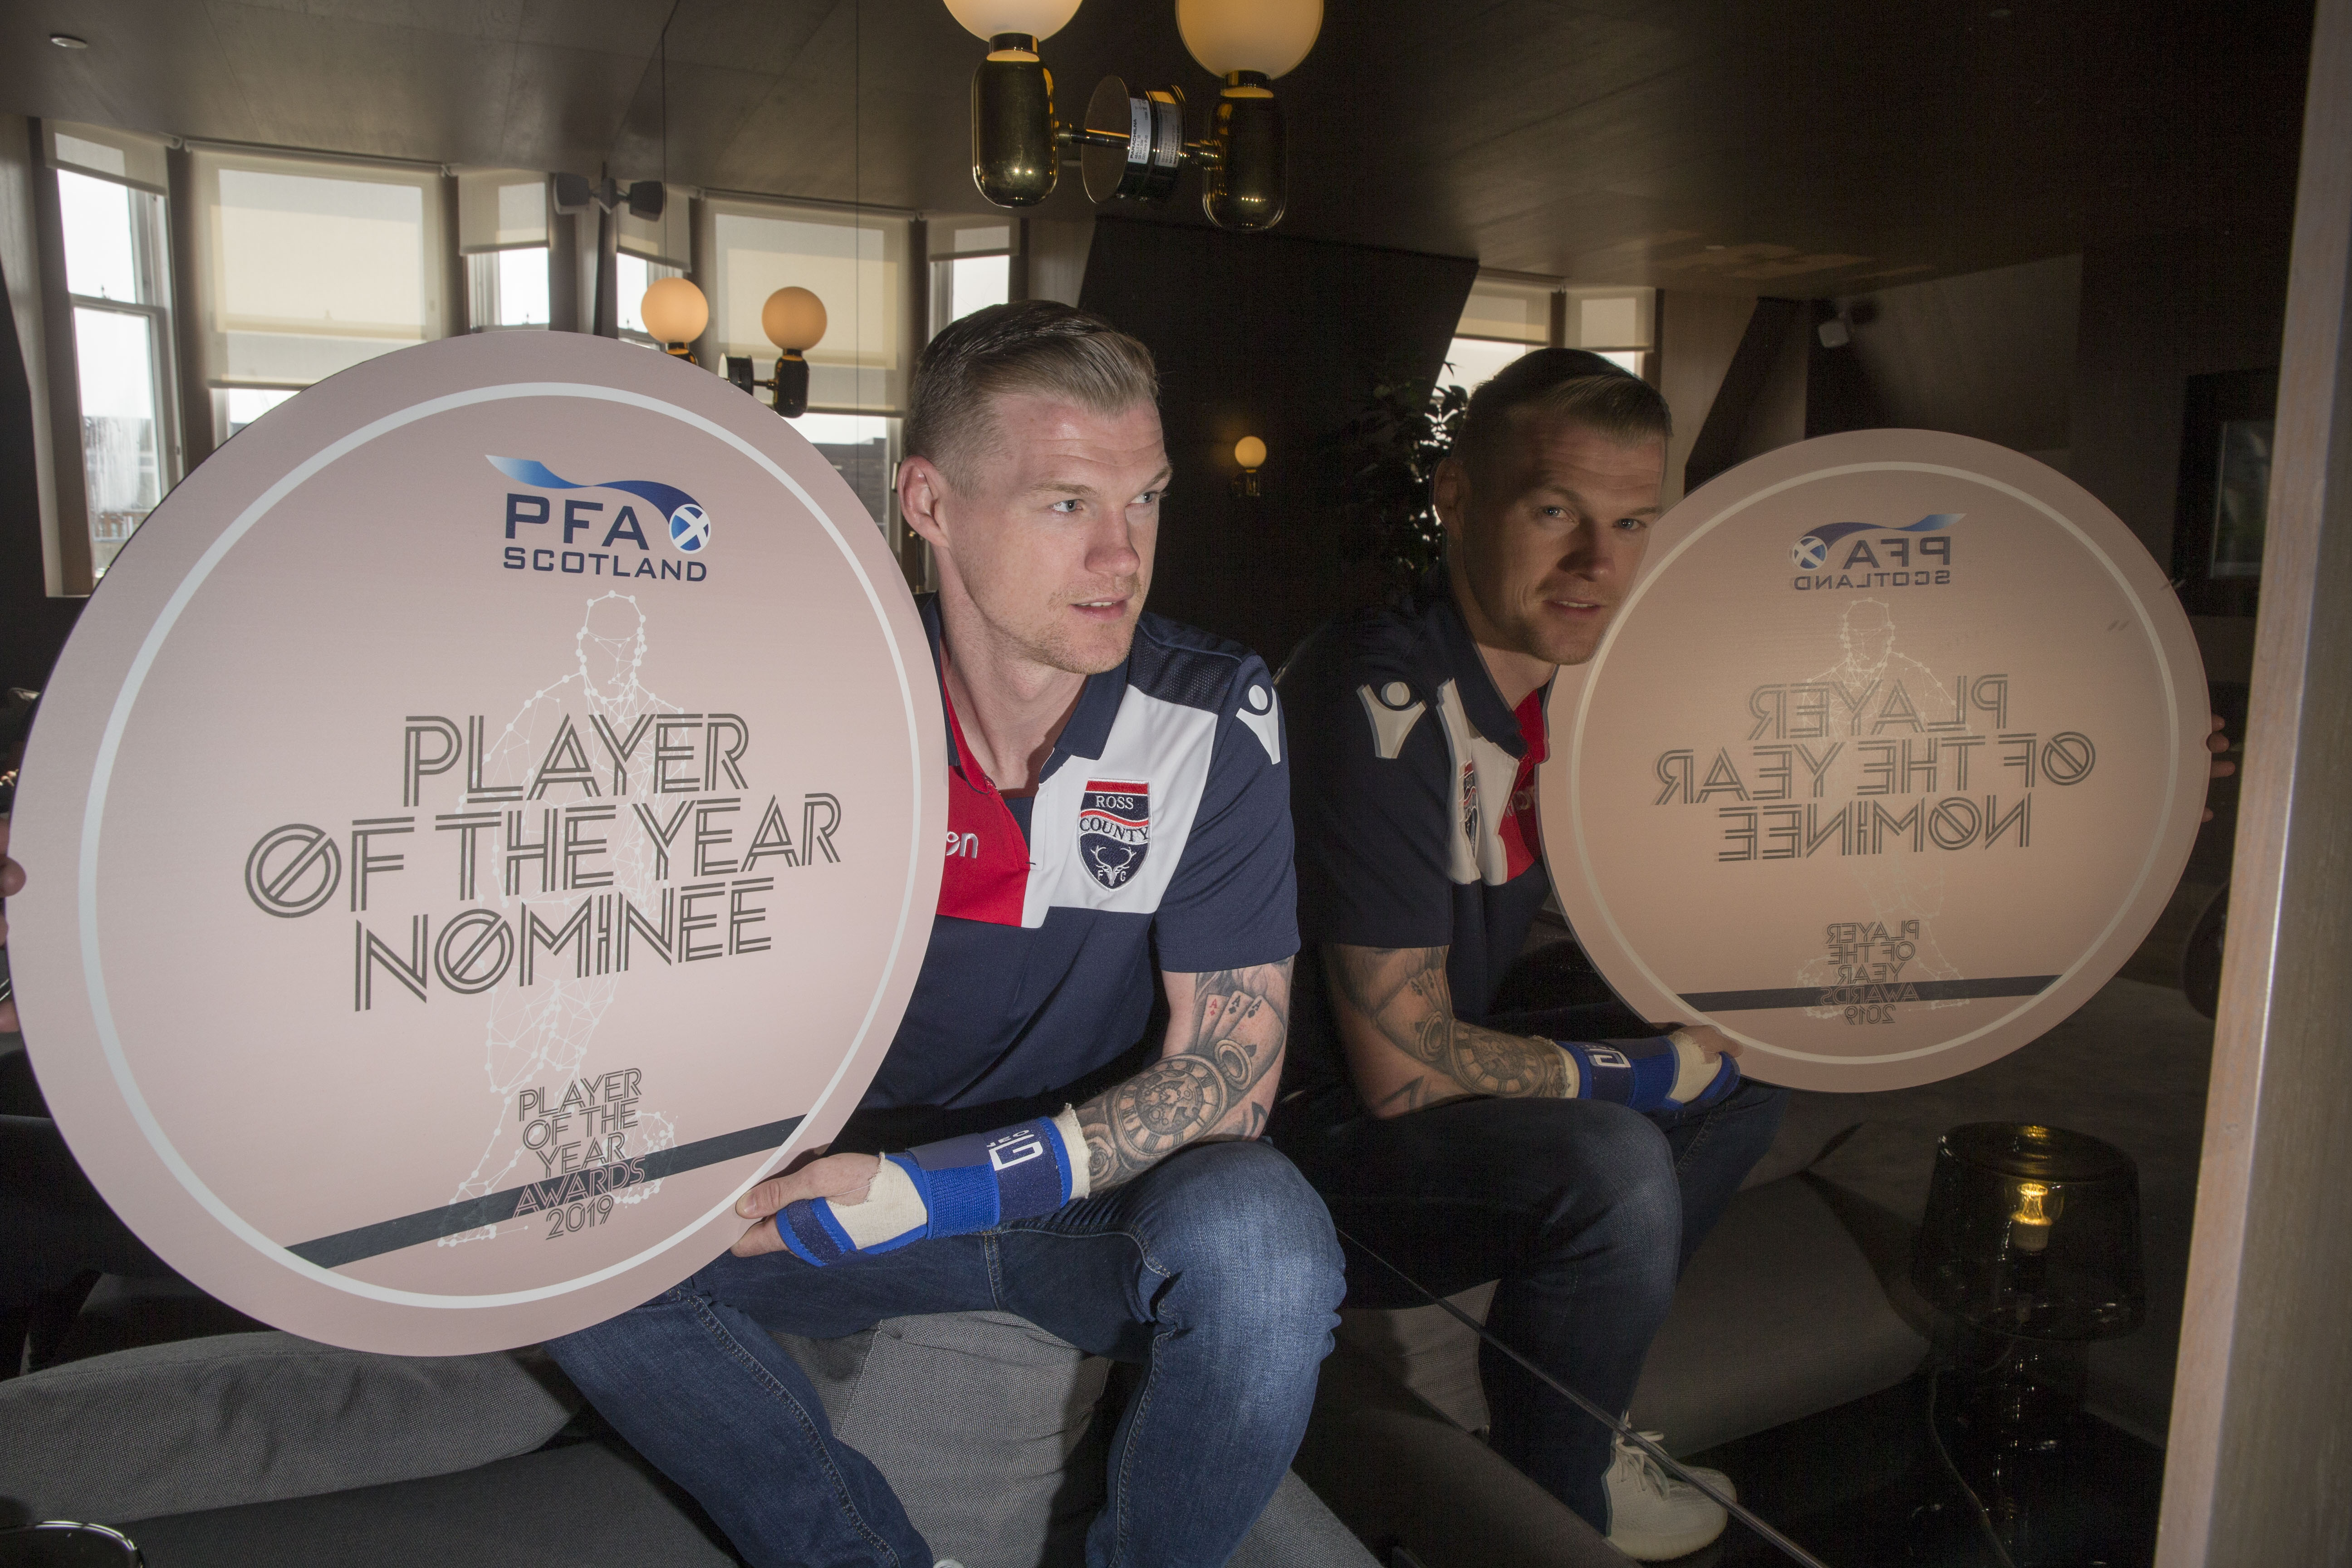 Billy Mckay is nominated for the Championship player of the year by PFA Scotland.